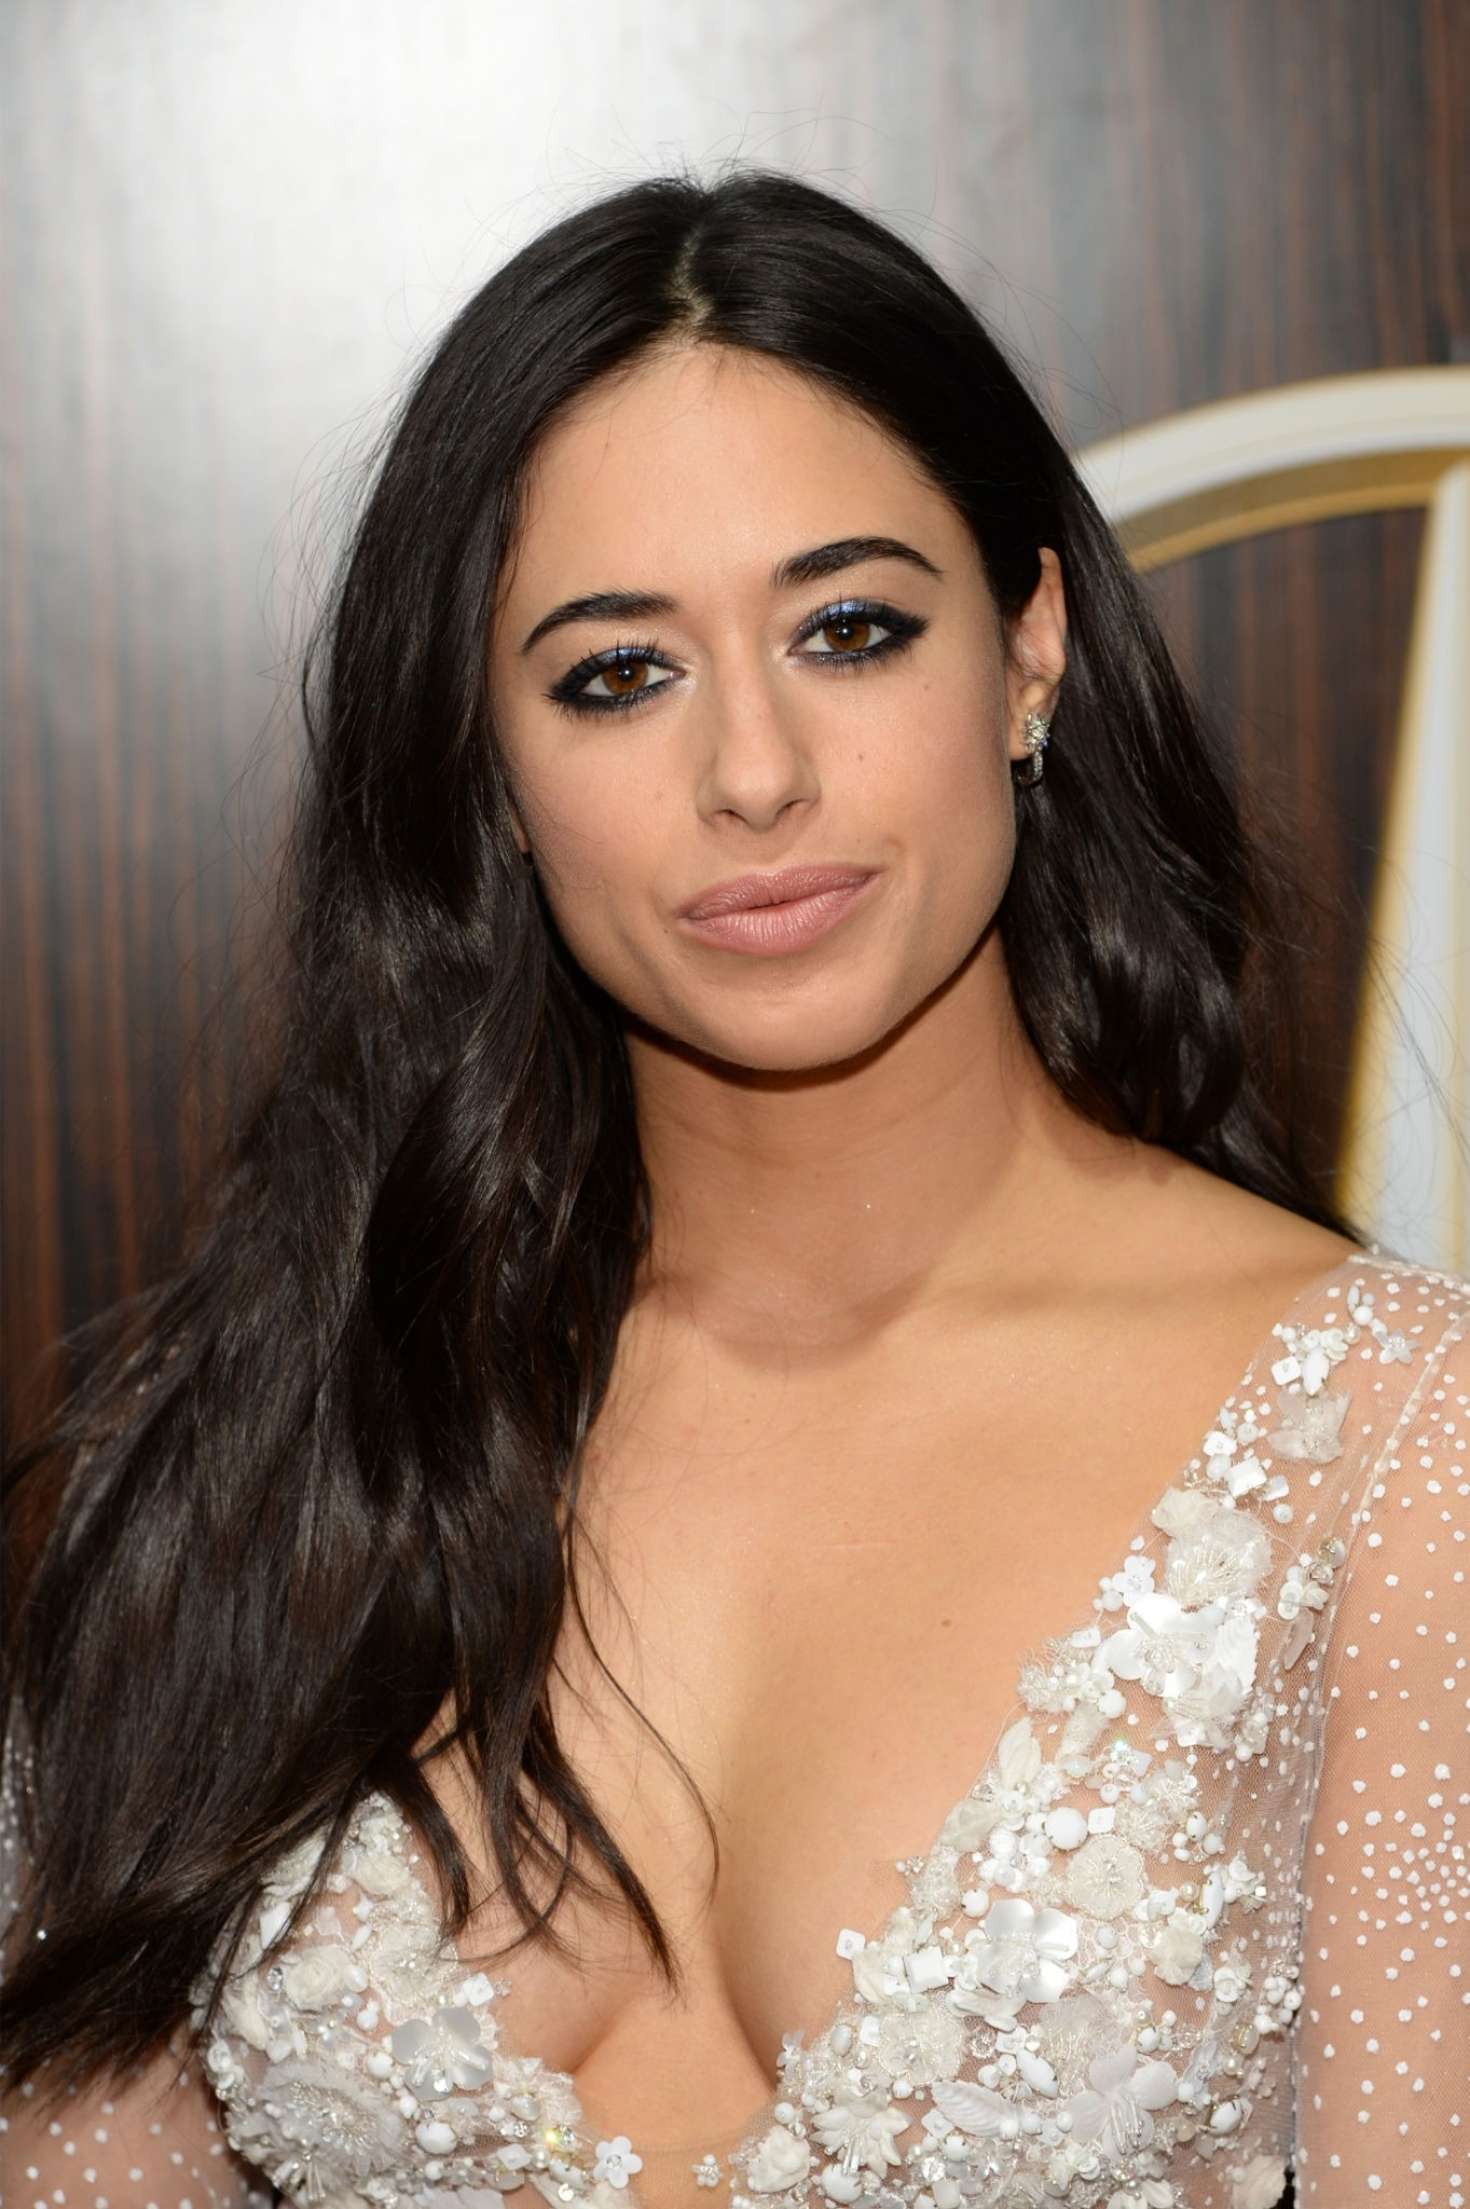 Jeanine Mason - 2019 Mercedes-Benz USA Awards Viewing Party in LA. 